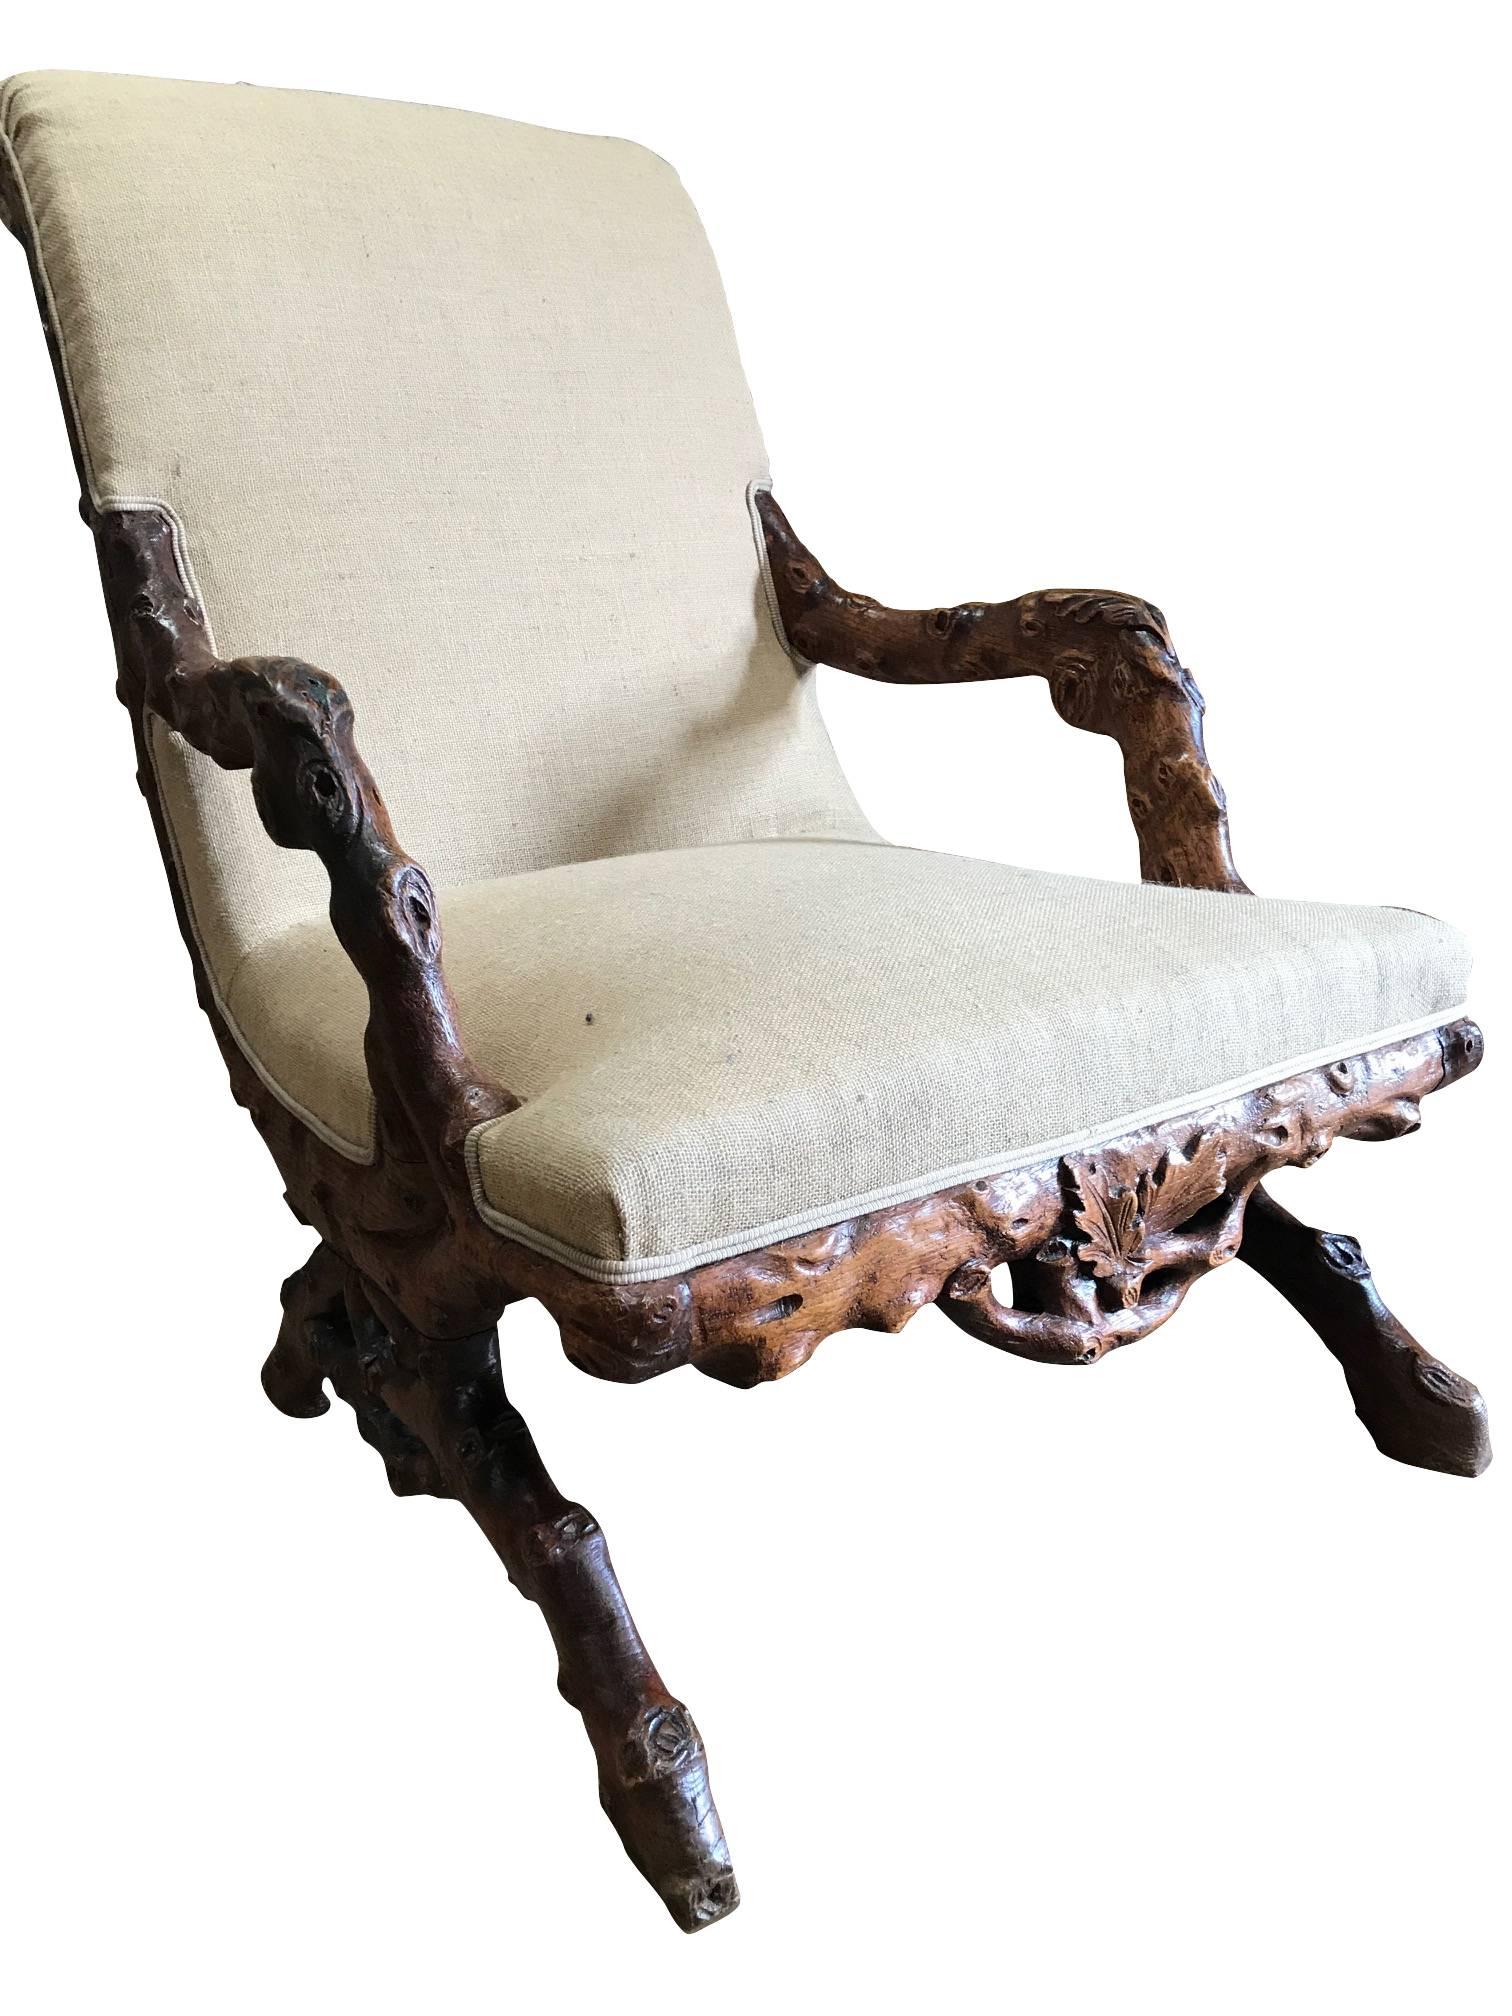 English rare and unusual 19th century chair frame made to look like tree branches.
Very decorative, sculptural and whimsical.
Newly reupholstered in linen.
 